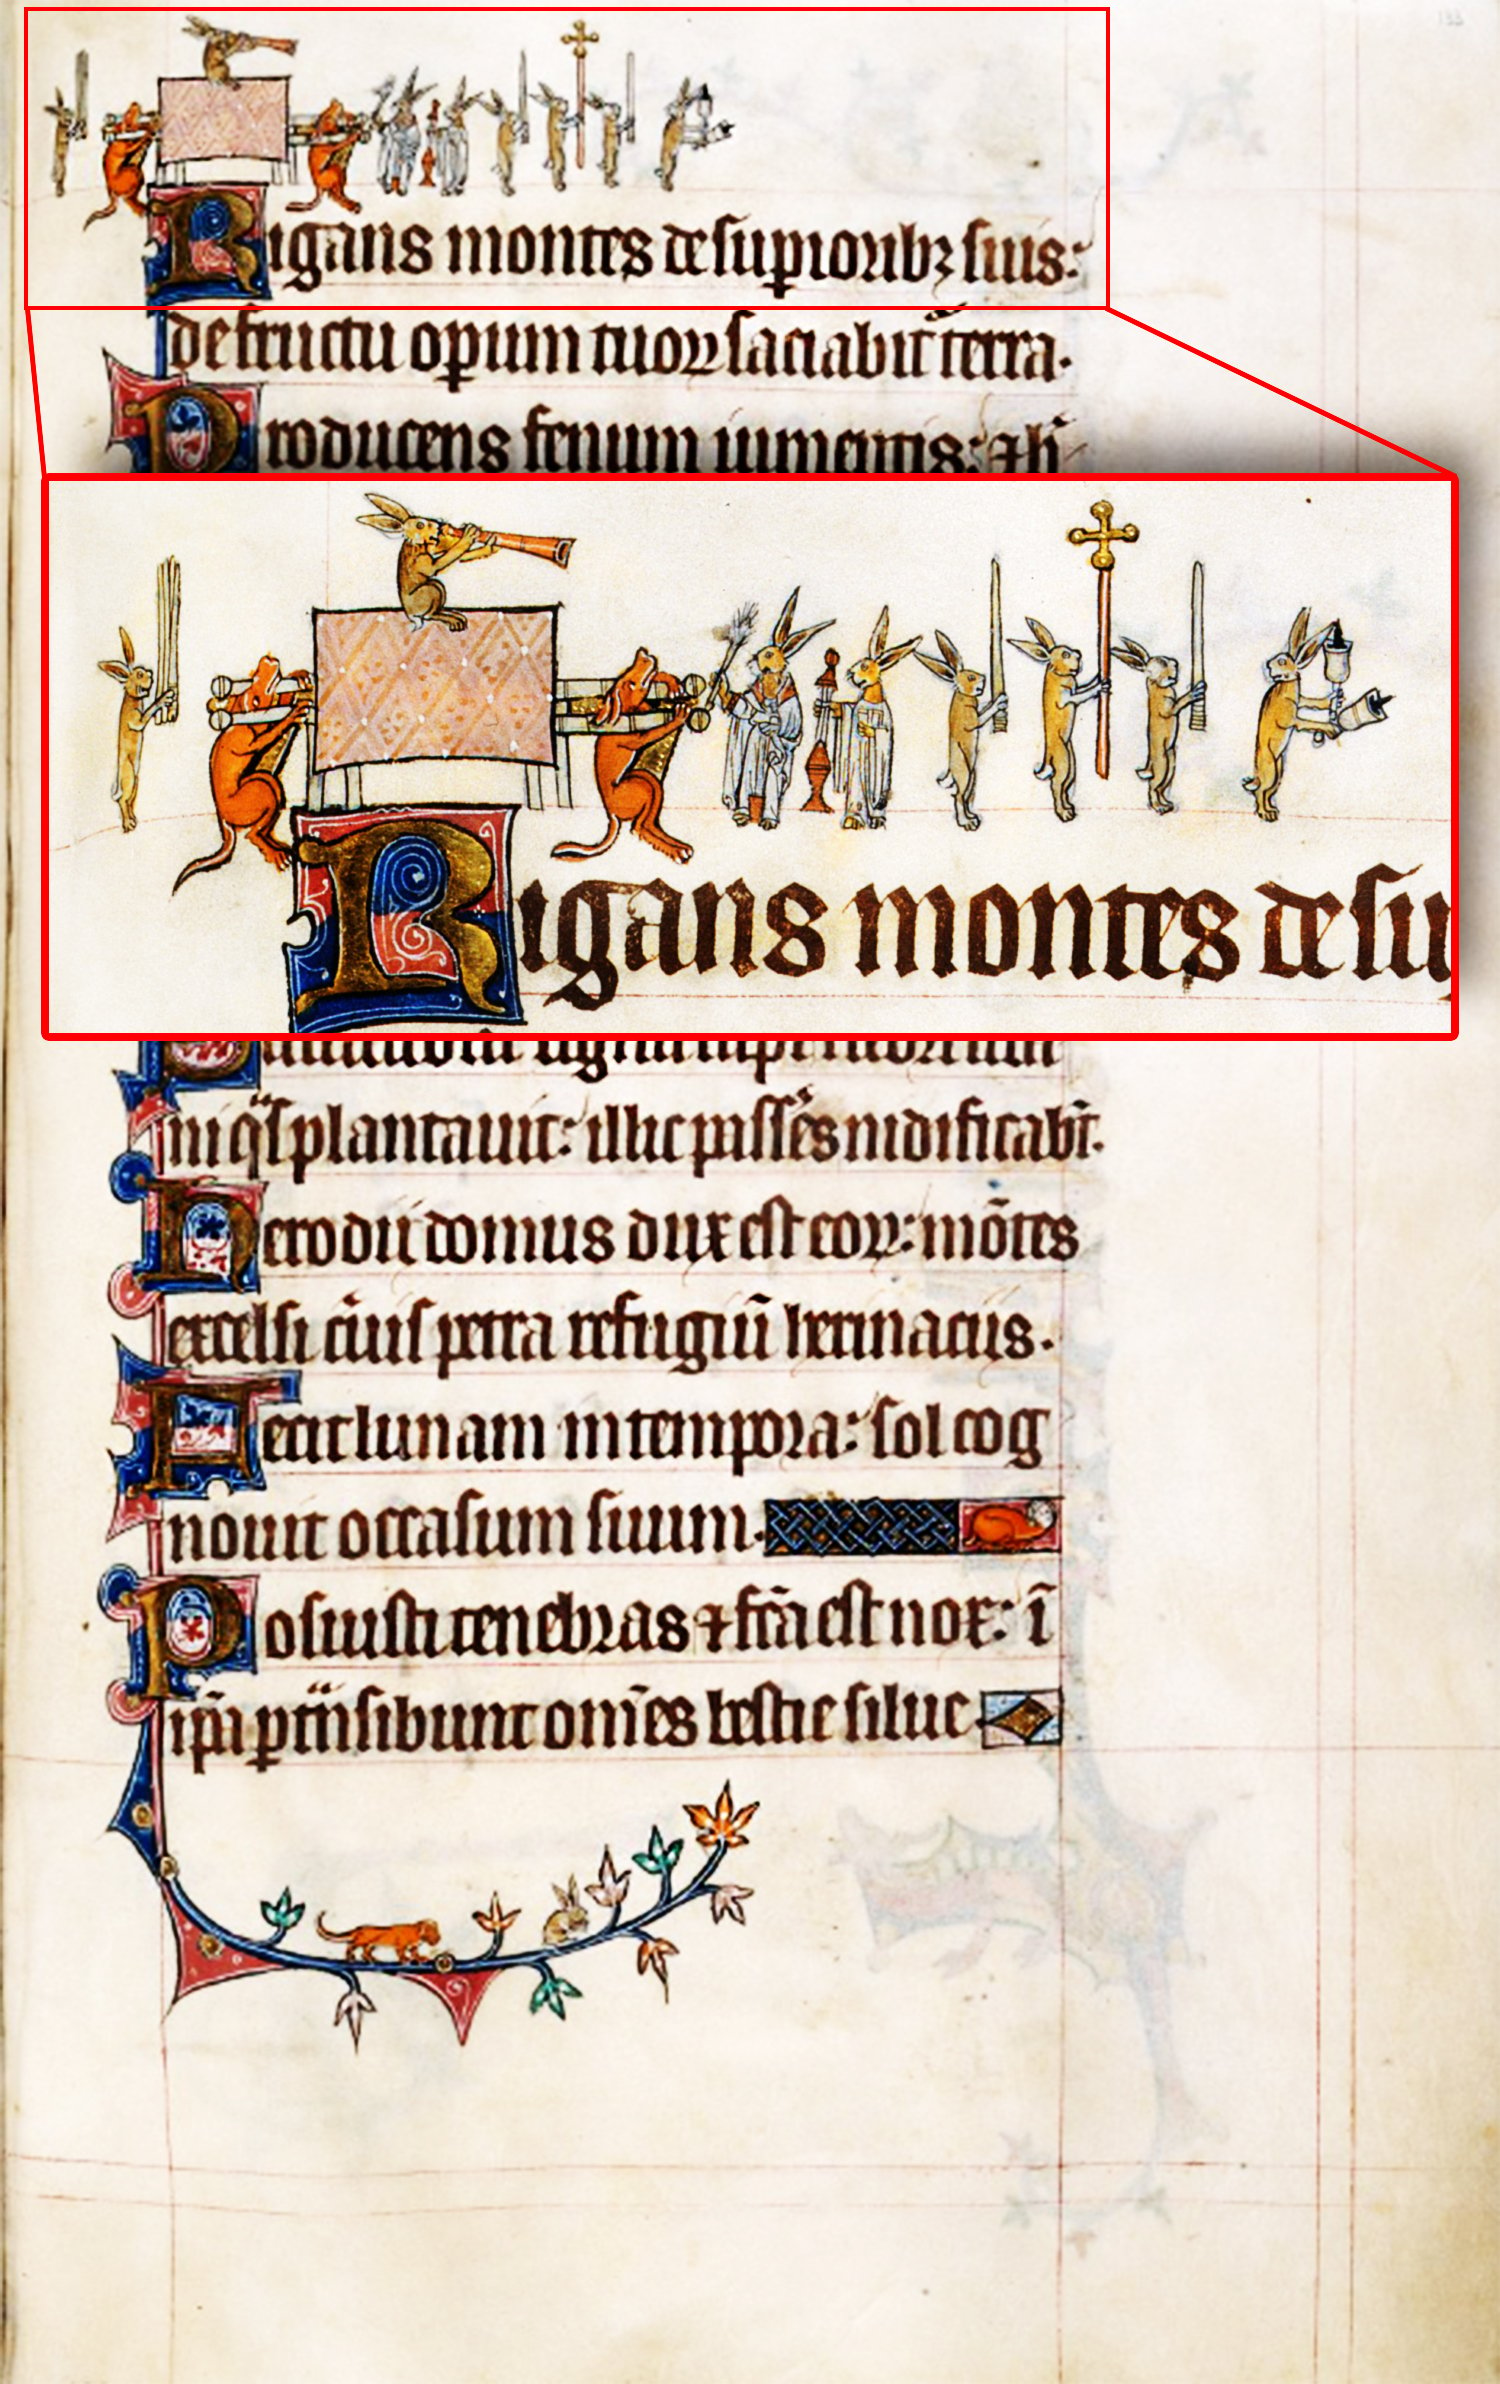 A medieval manuscript page with large blue and gold initials at the beginning of each sentence. The page has a marginal illustration of a procession of rabbits with weapons and a cross. The text is written in Latin in a Gothic script. The page is slightly damaged and stained.